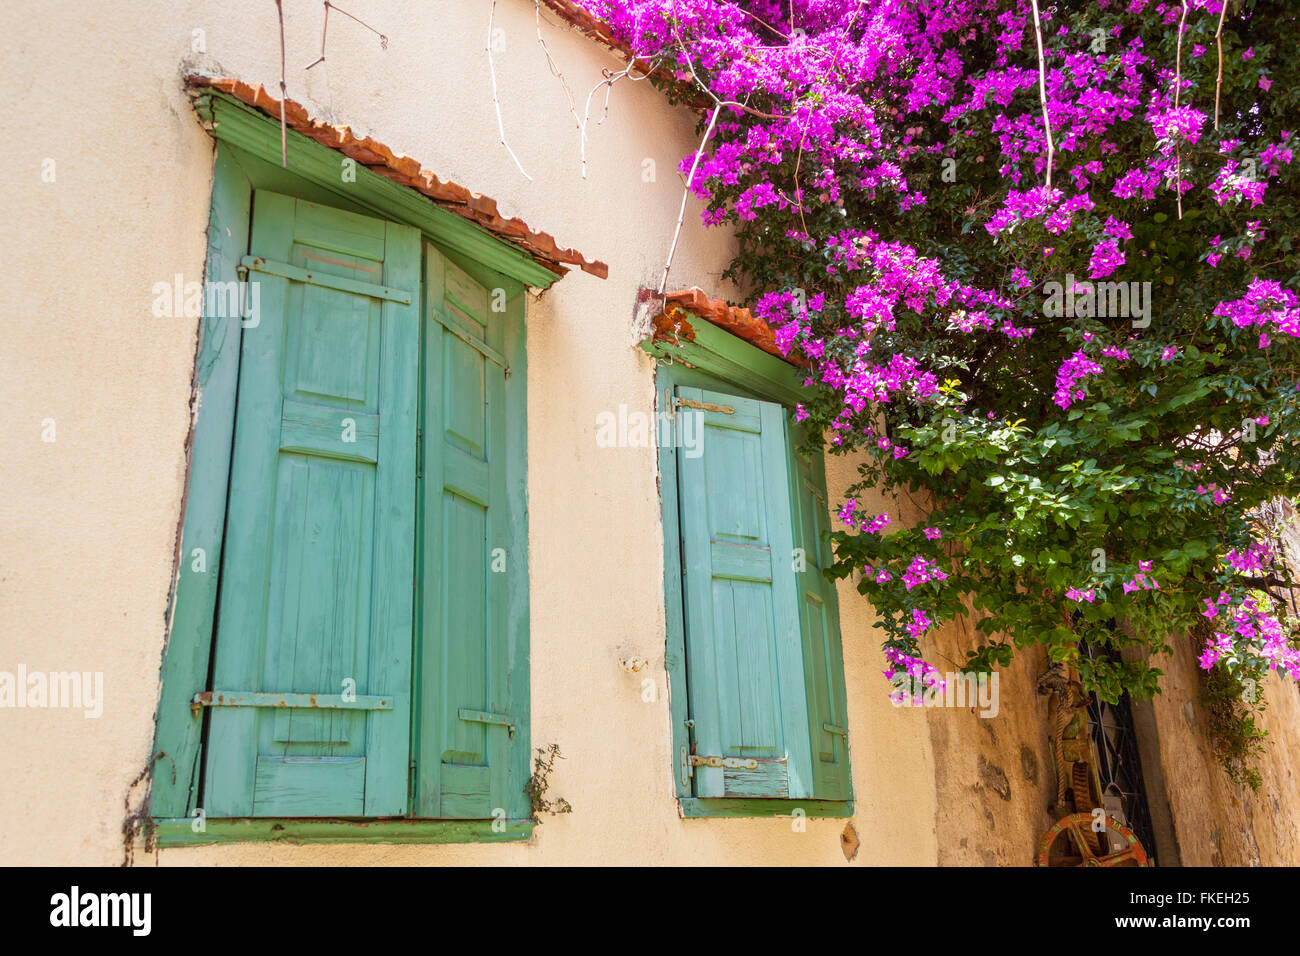 Green window shutters on a house in the town of Chios, Chios, Greece Stock Photo